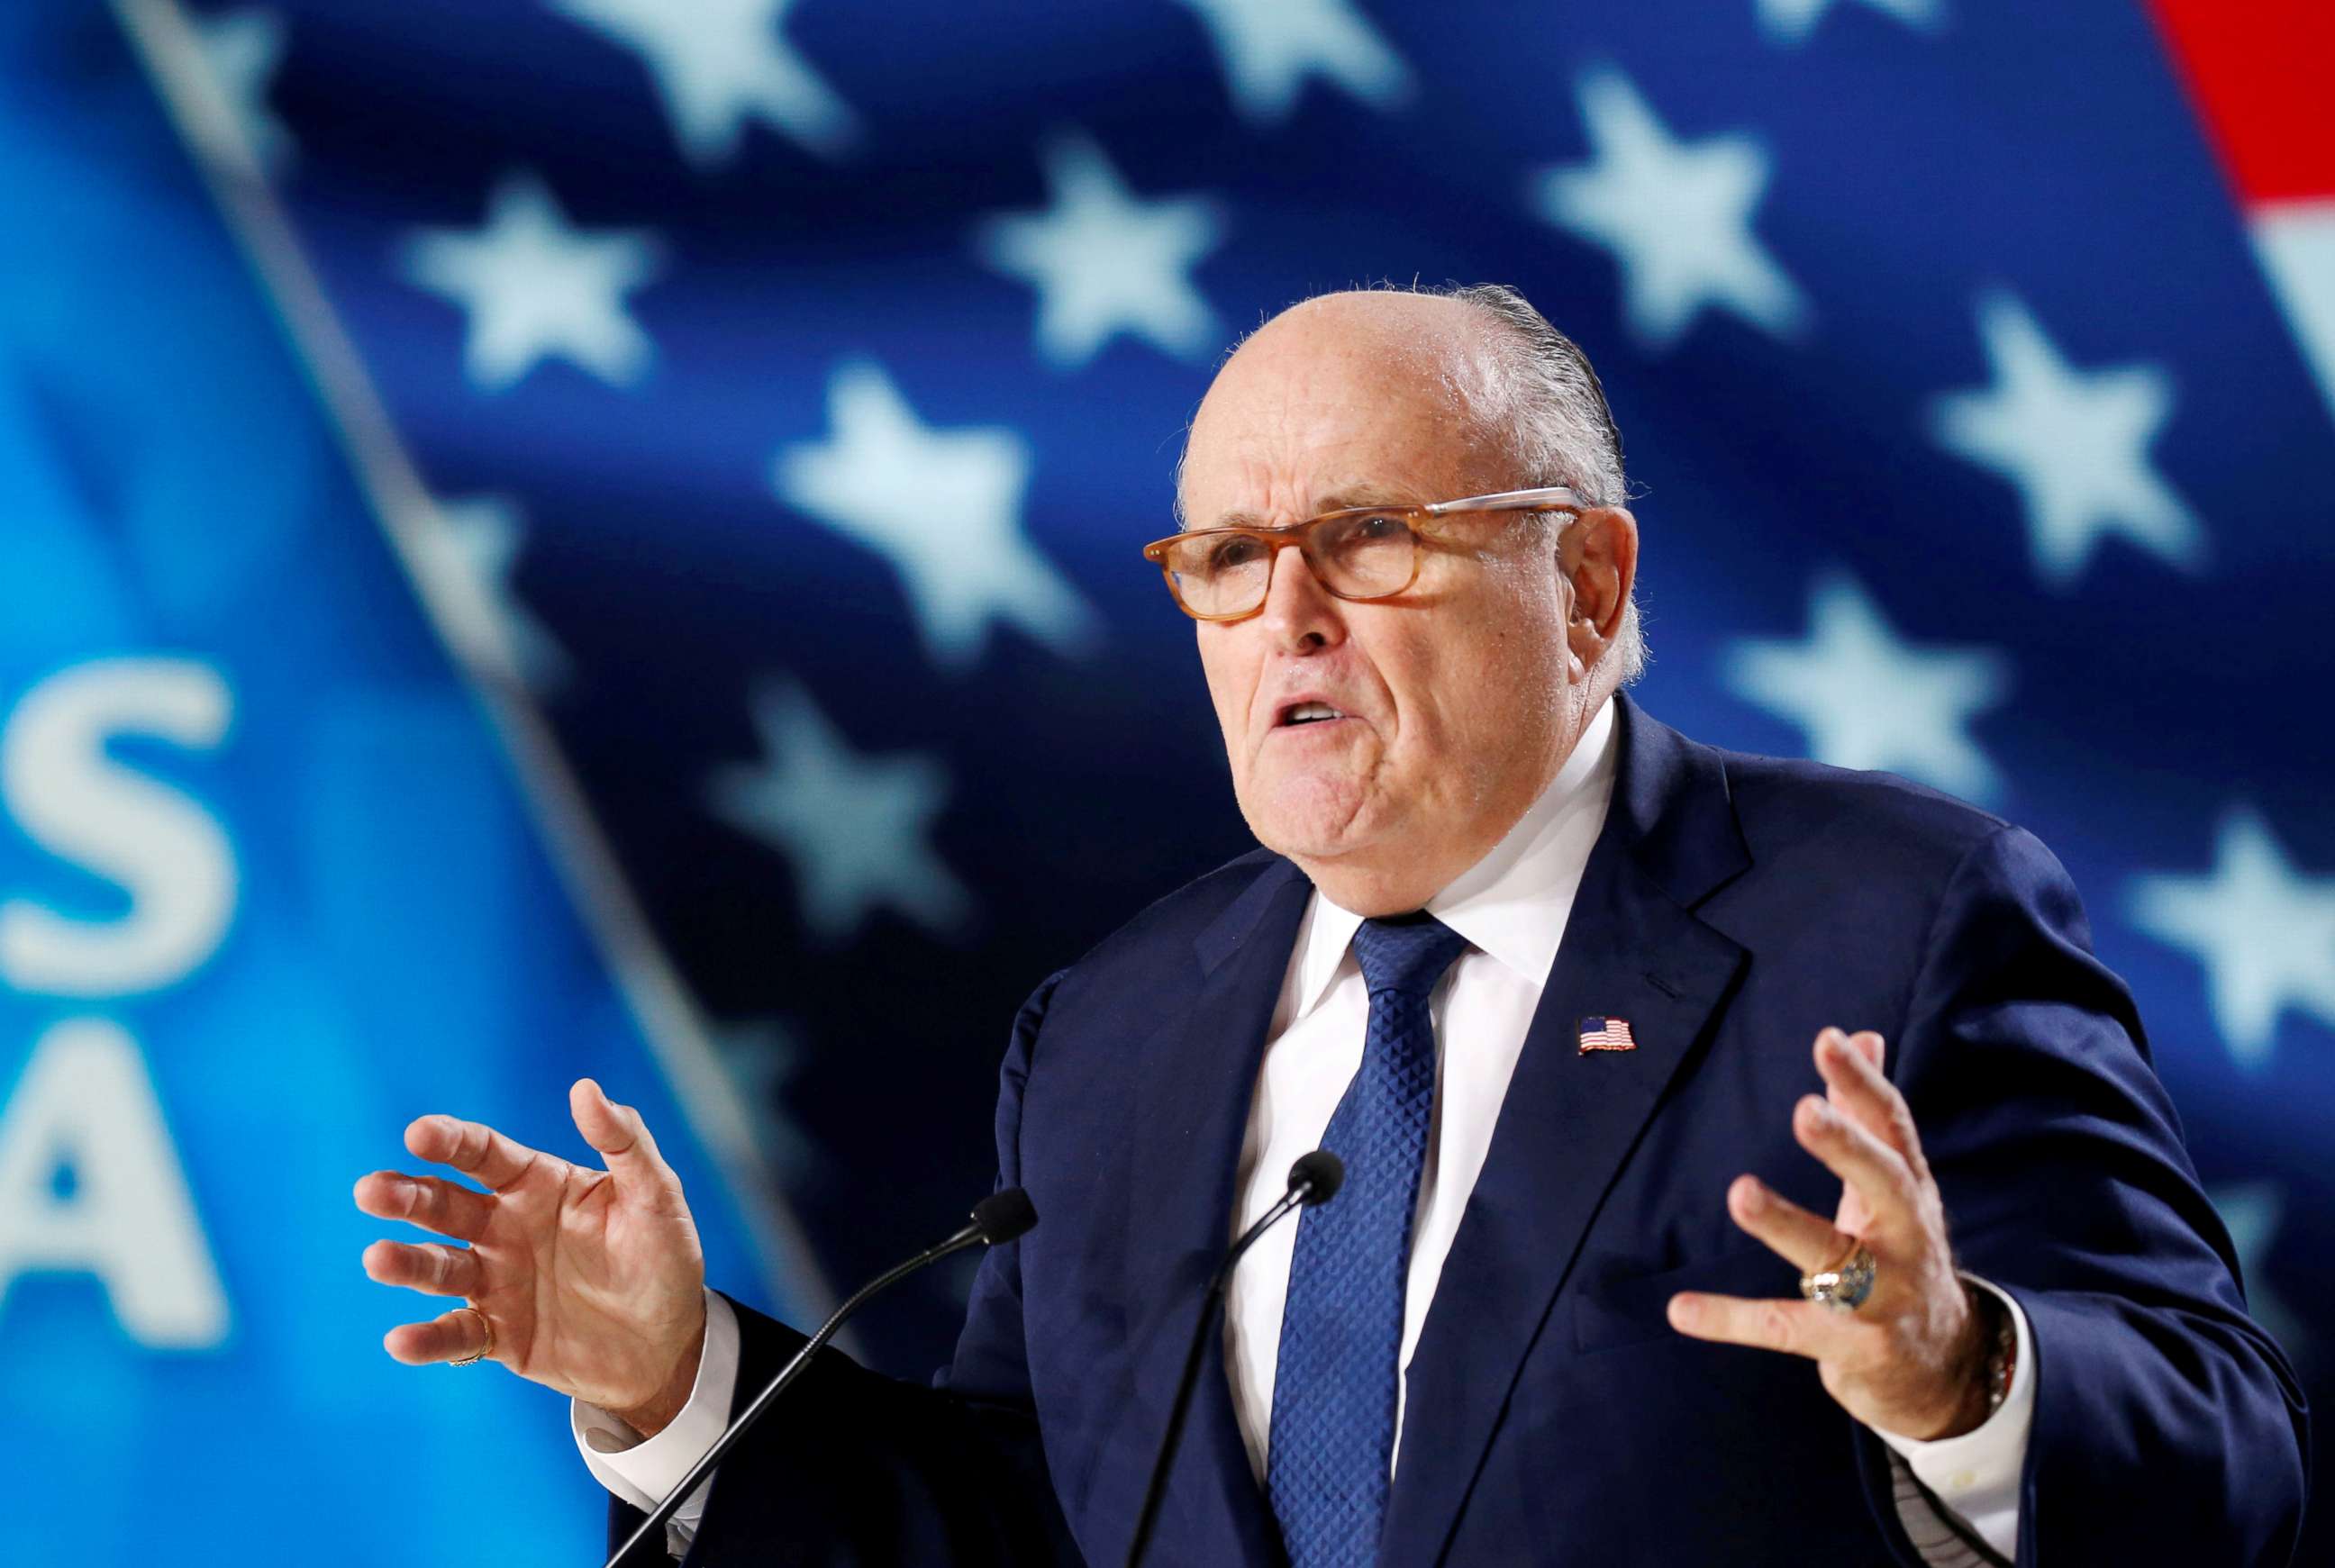 PHOTO: Rudy Giuliani, former Mayor of New York City, delivers his speech as he attends the National Council of Resistance of Iran (NCRI), meeting in Villepinte, France, June 30, 2018.